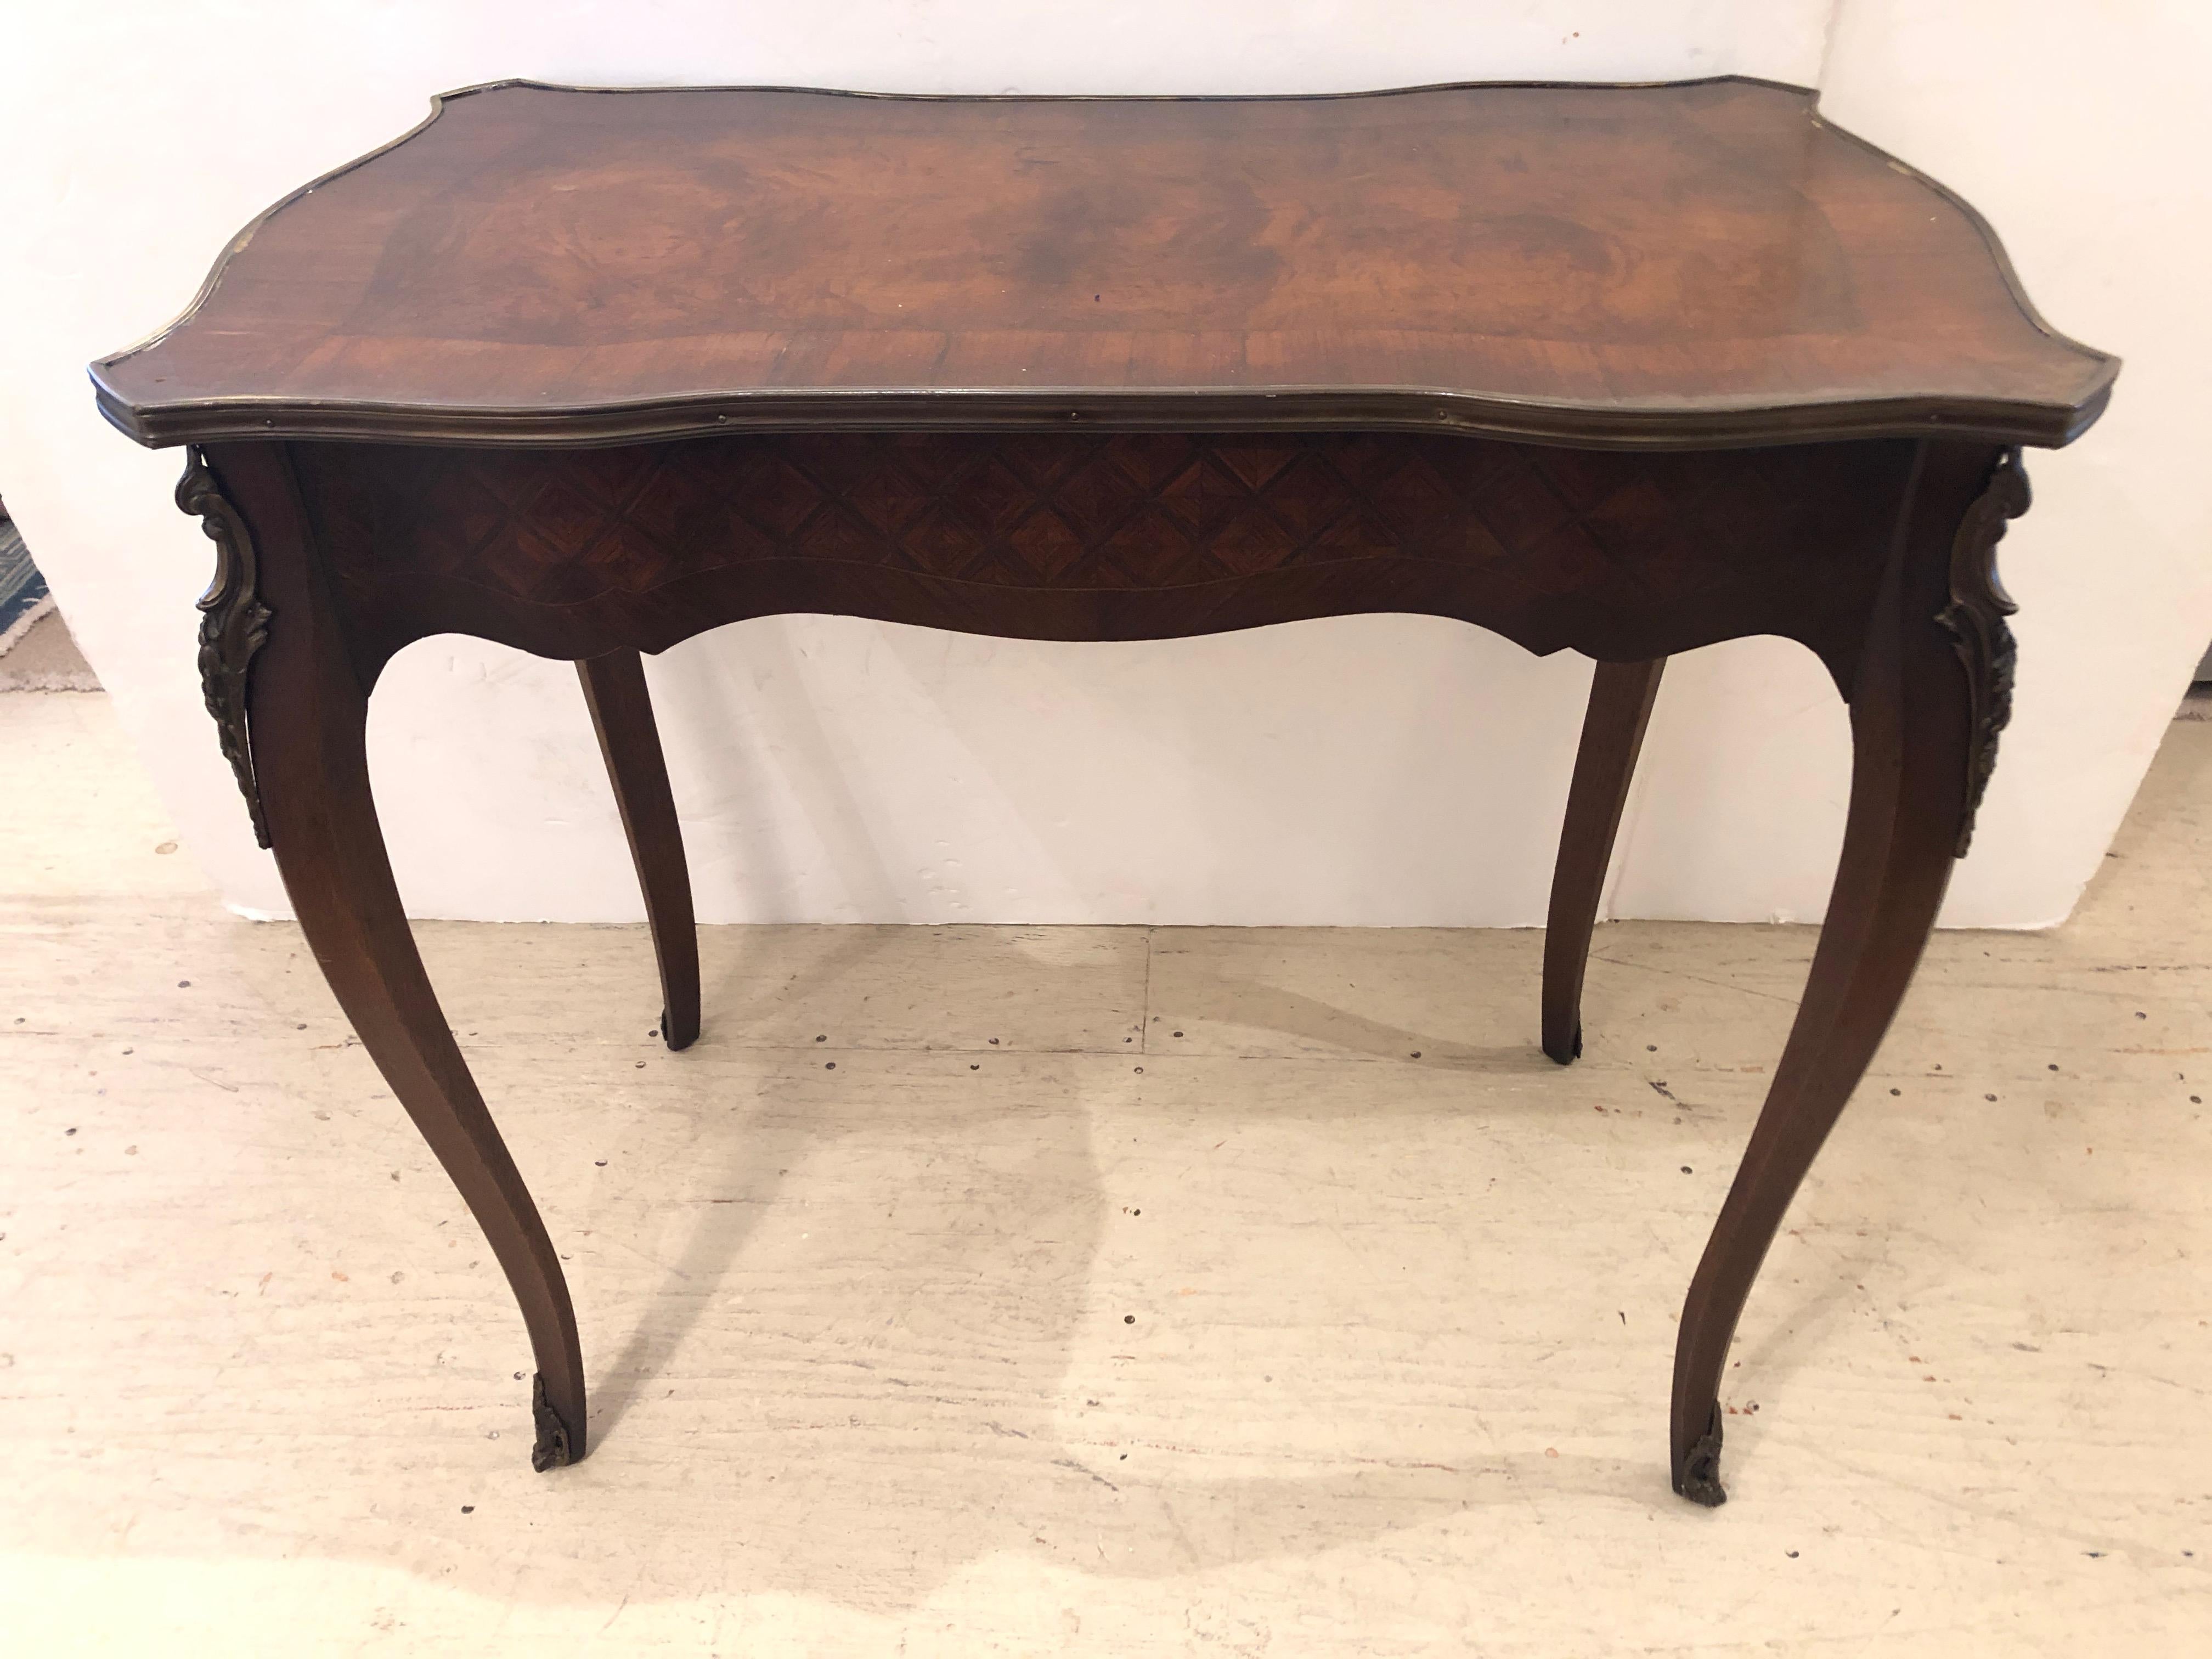 A wonderful small size writing desk, finished on all sides with beautiful mahogany inlaid marquetry, a burl wood top with brass gallery, and having a single large drawer with excellent dovetailing, ormalu mounts, and elegant cabriole legs. Could be